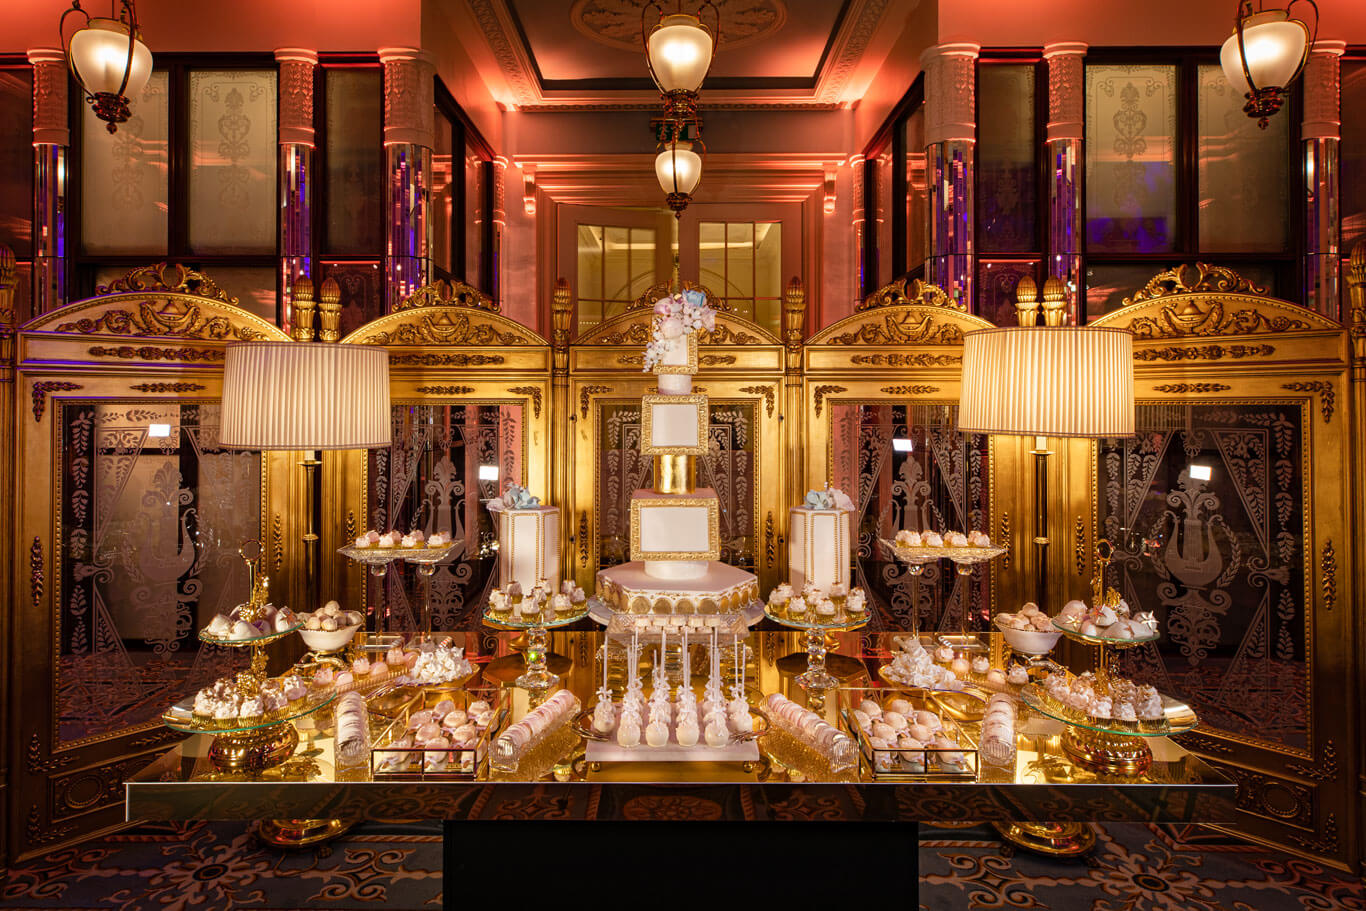 luxury desert bar with cakes and sweet treats designed for an exclusive event at the lanesborough in london